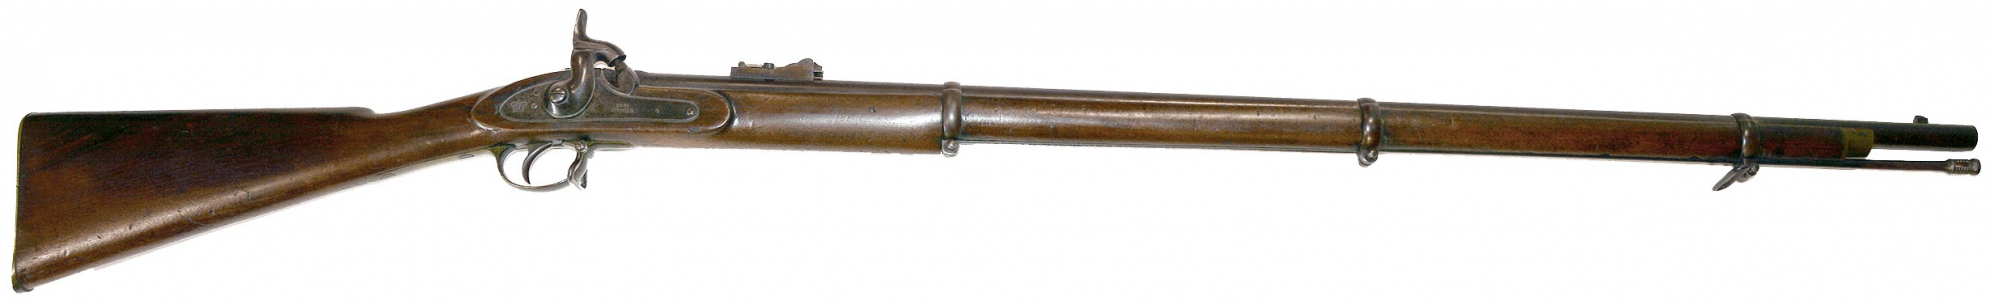 IDENTIFIED CONFEDERATE JS ANCHOR ENFIELD